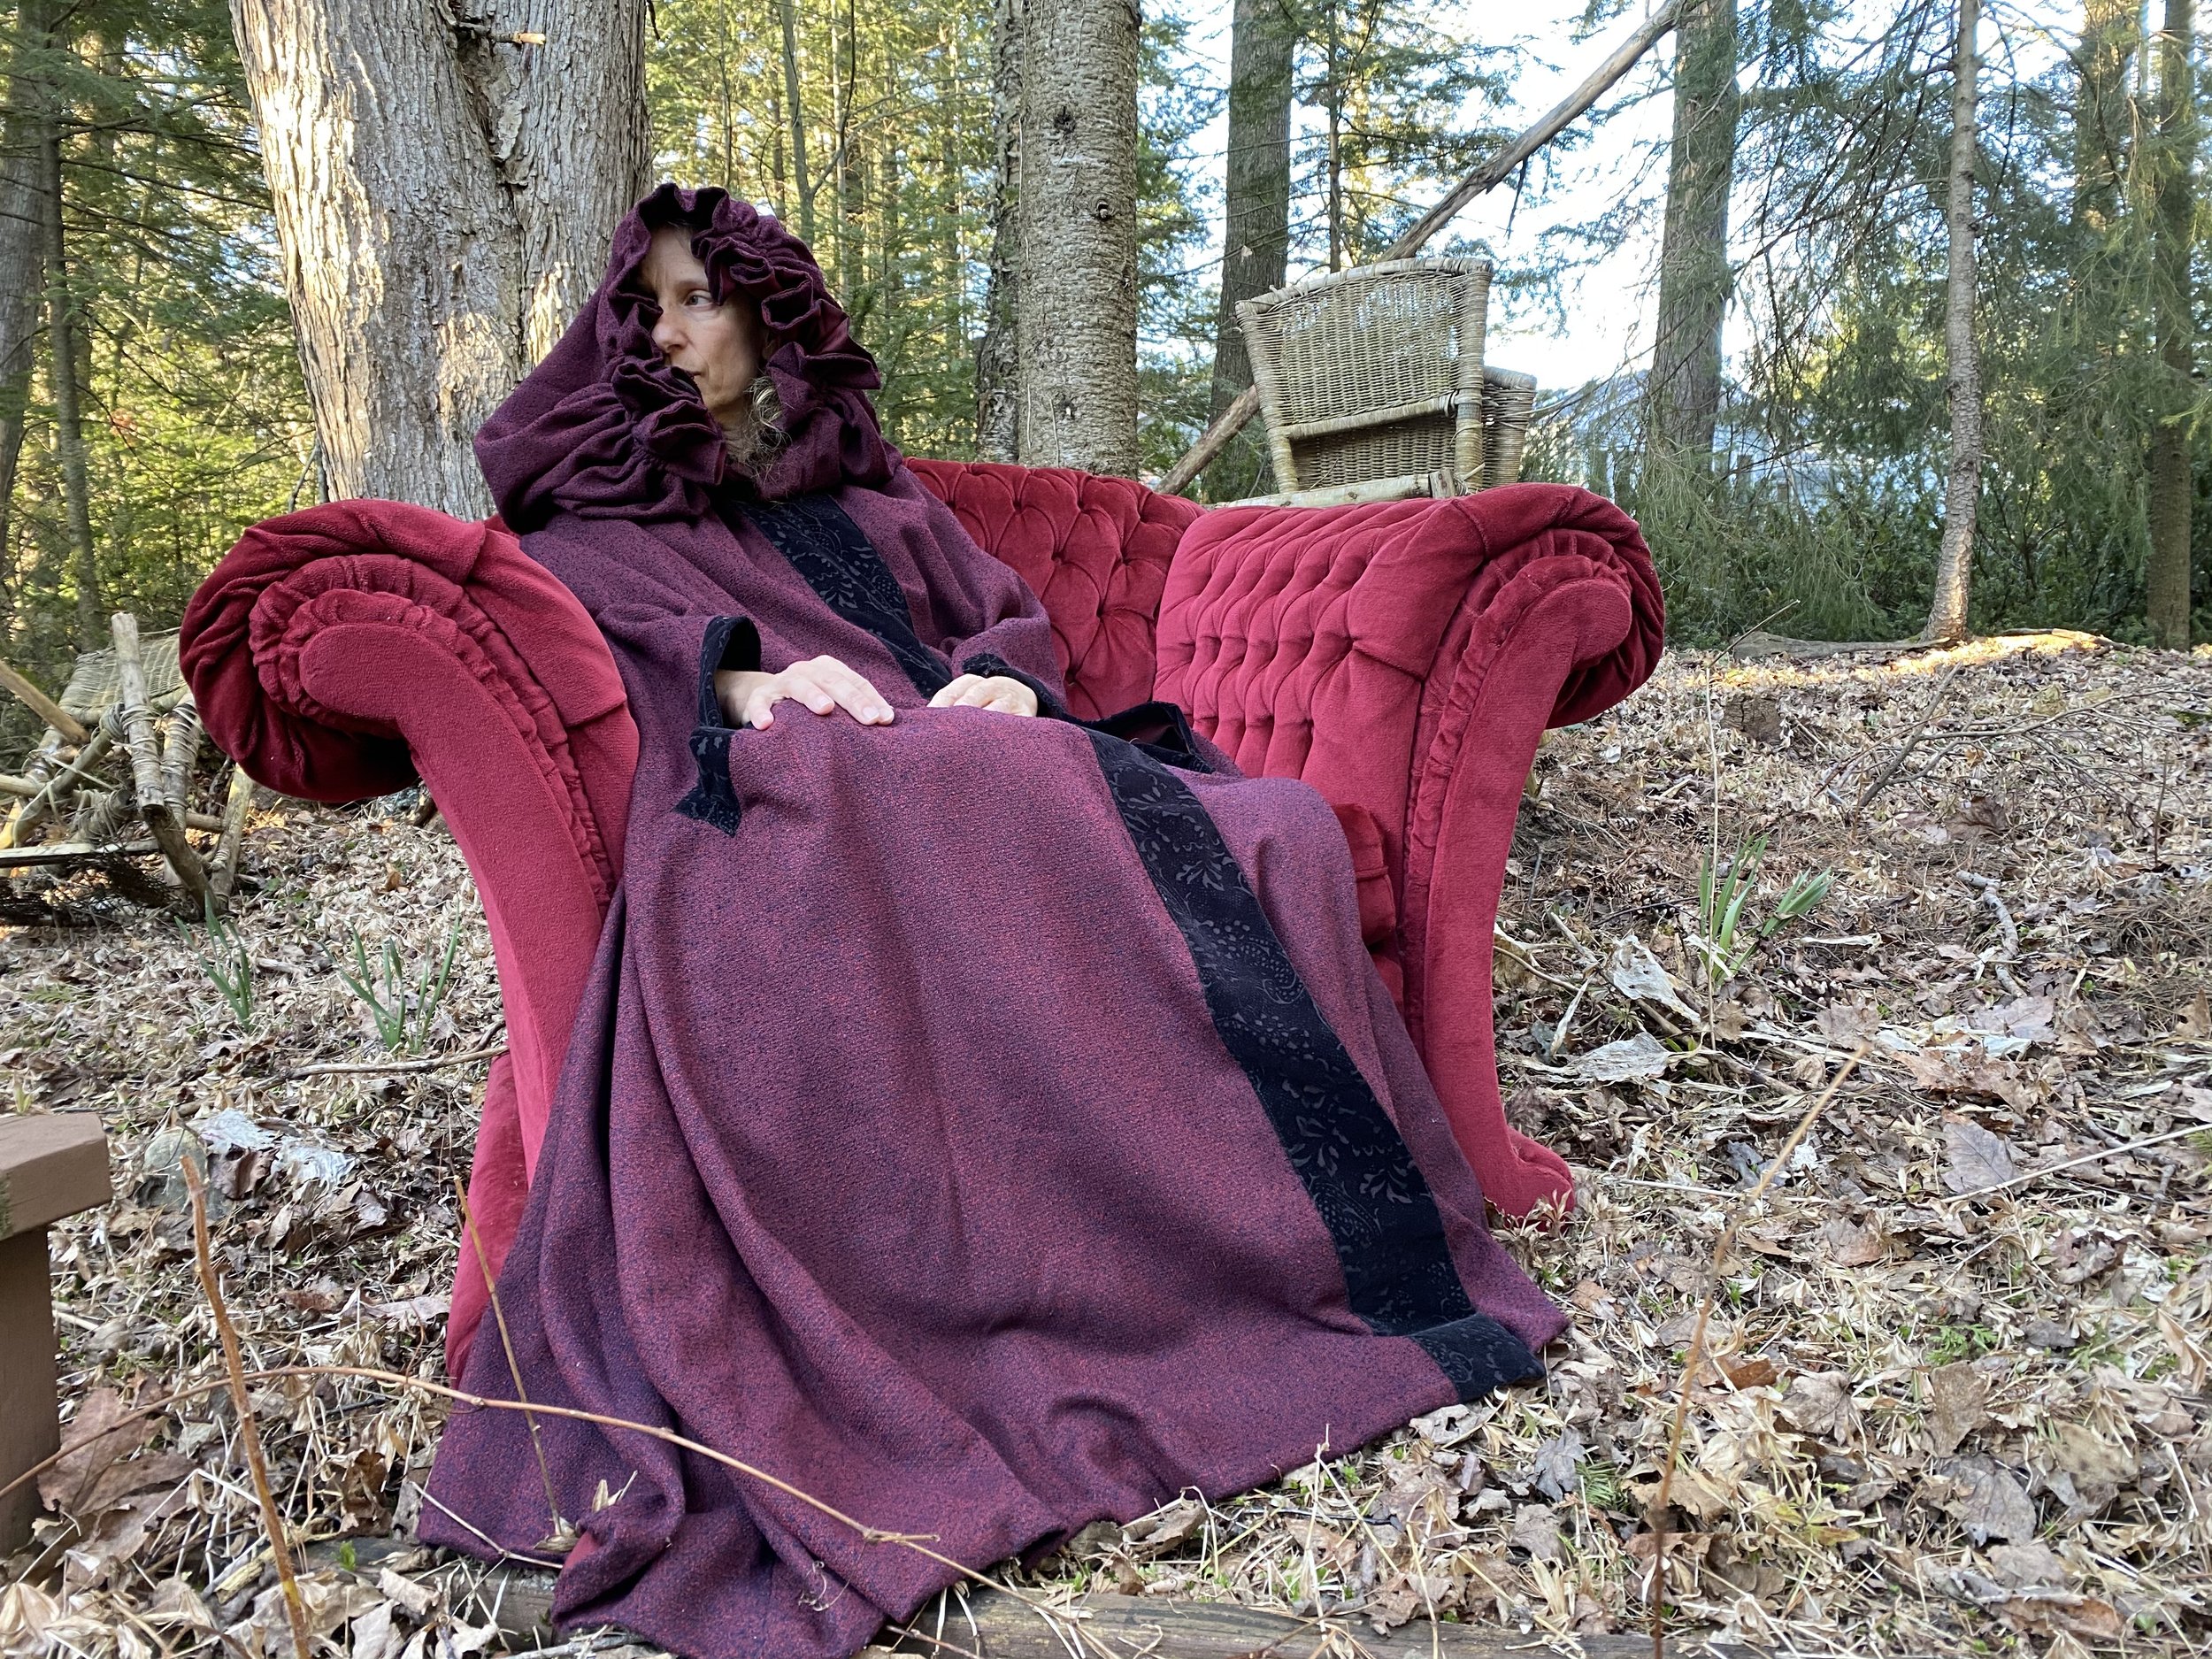 A woman donned in a purplish red dress, and hood, while sitting in a bright red chair in the middle of the woods